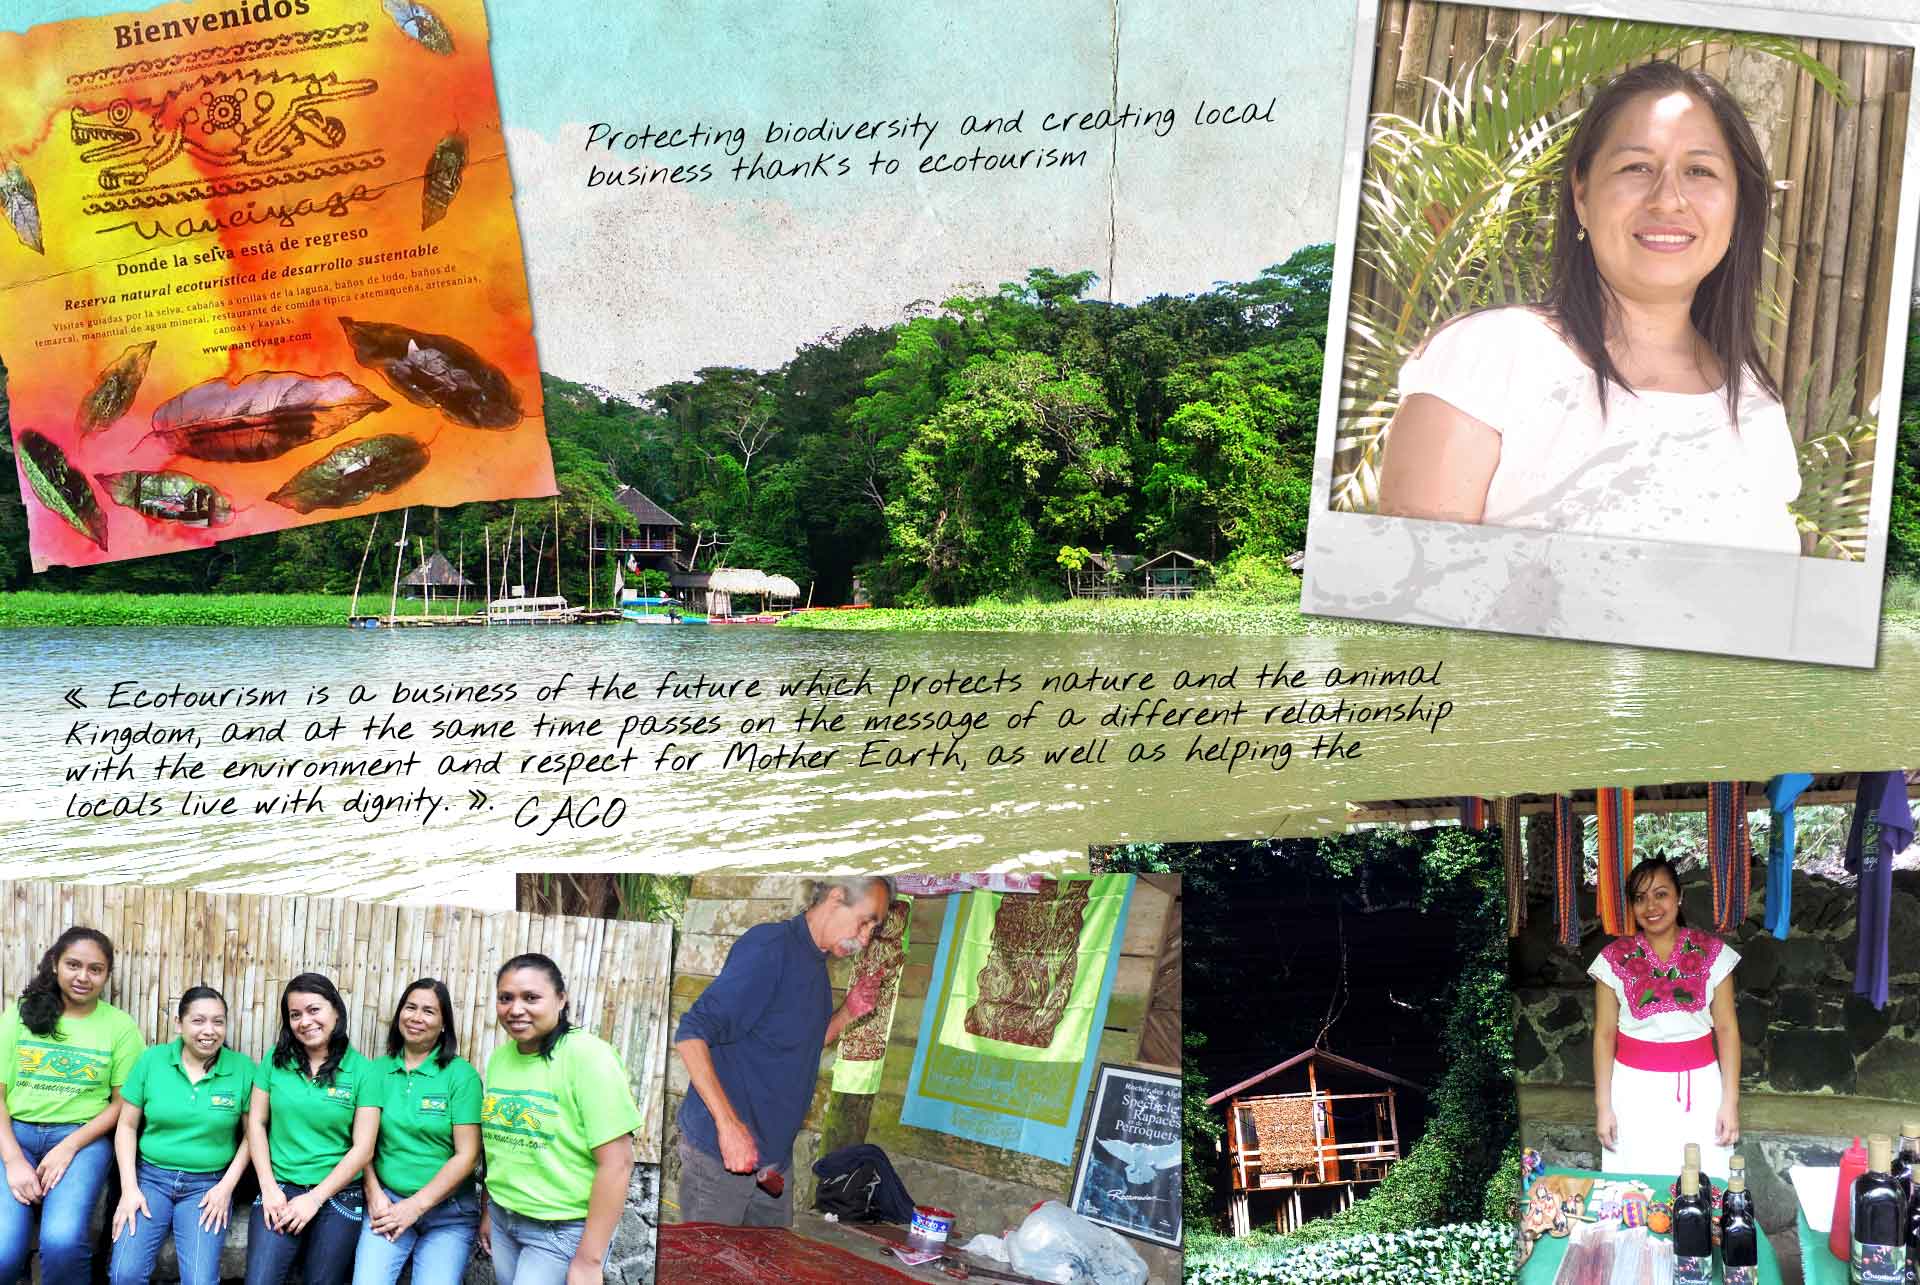 Protecting biodiversity and creating local business thanks to ecotourism “Ecotourism is a business of the future which protects nature and the animal kingdom, and at the same time passes on the message of a different relationship with the environment and respect for Mother Earth, as well as helping the locals live with dignity.” CACO